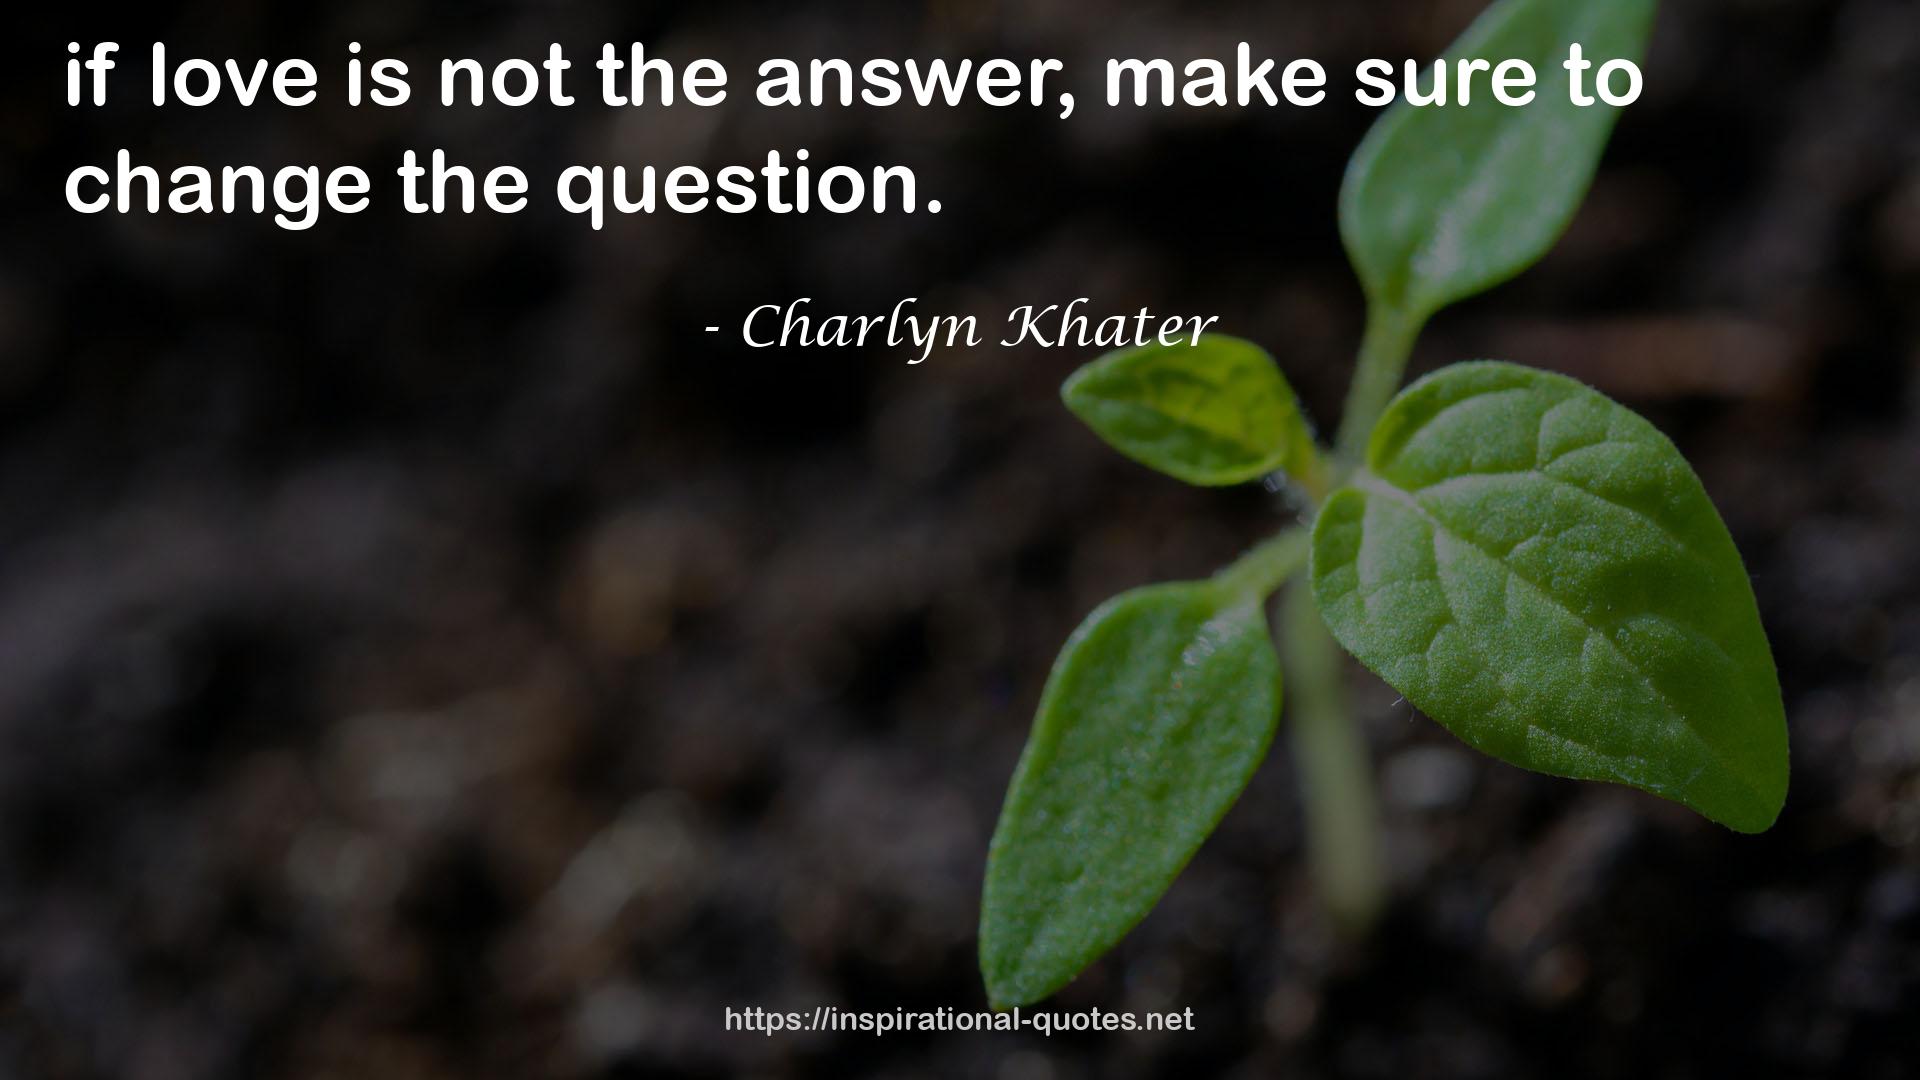 Charlyn Khater QUOTES